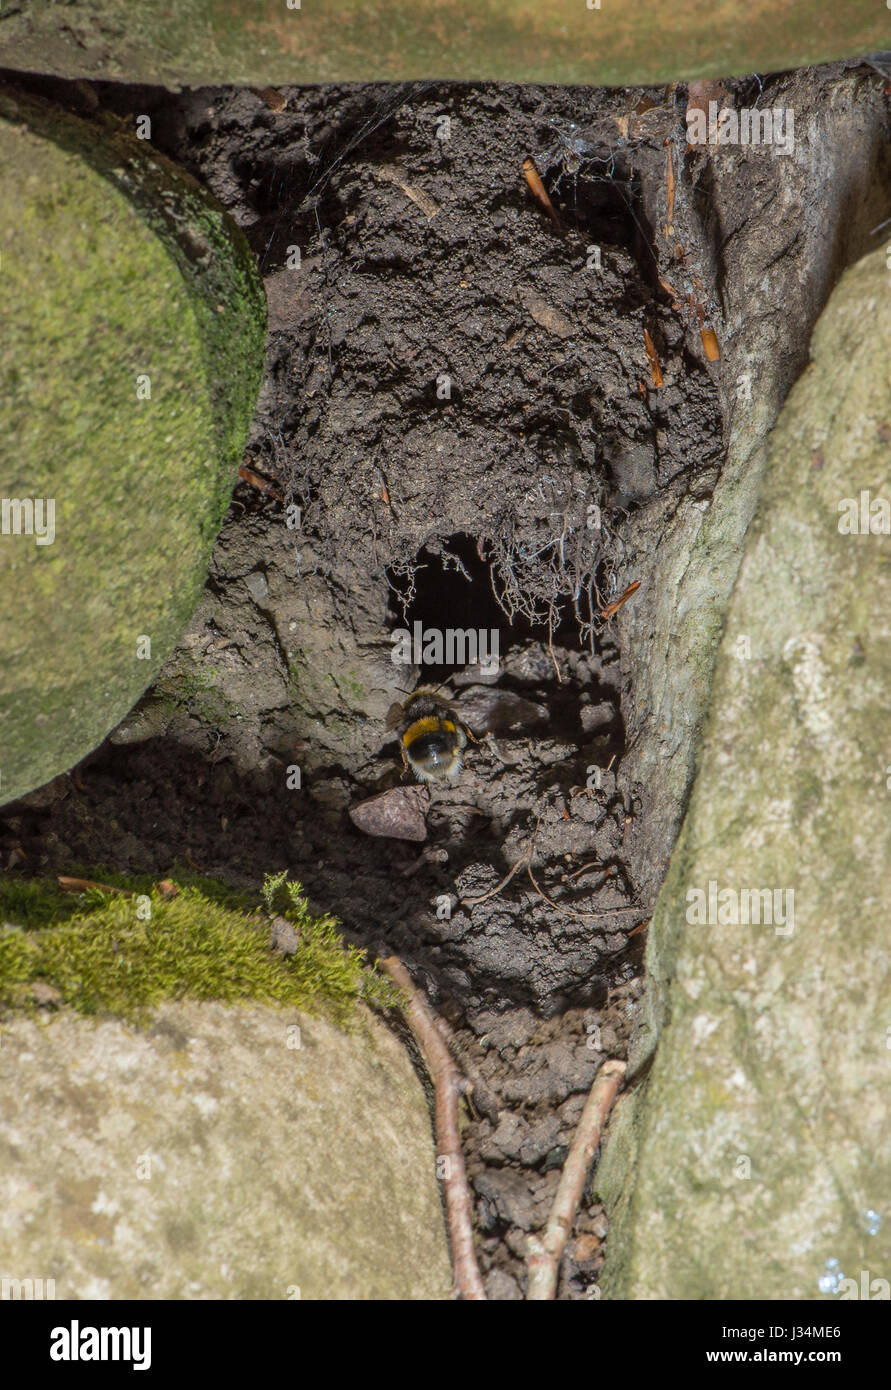 Bumble bee nest in a stone garden wall, Chipping, Lancashire. Stock Photo